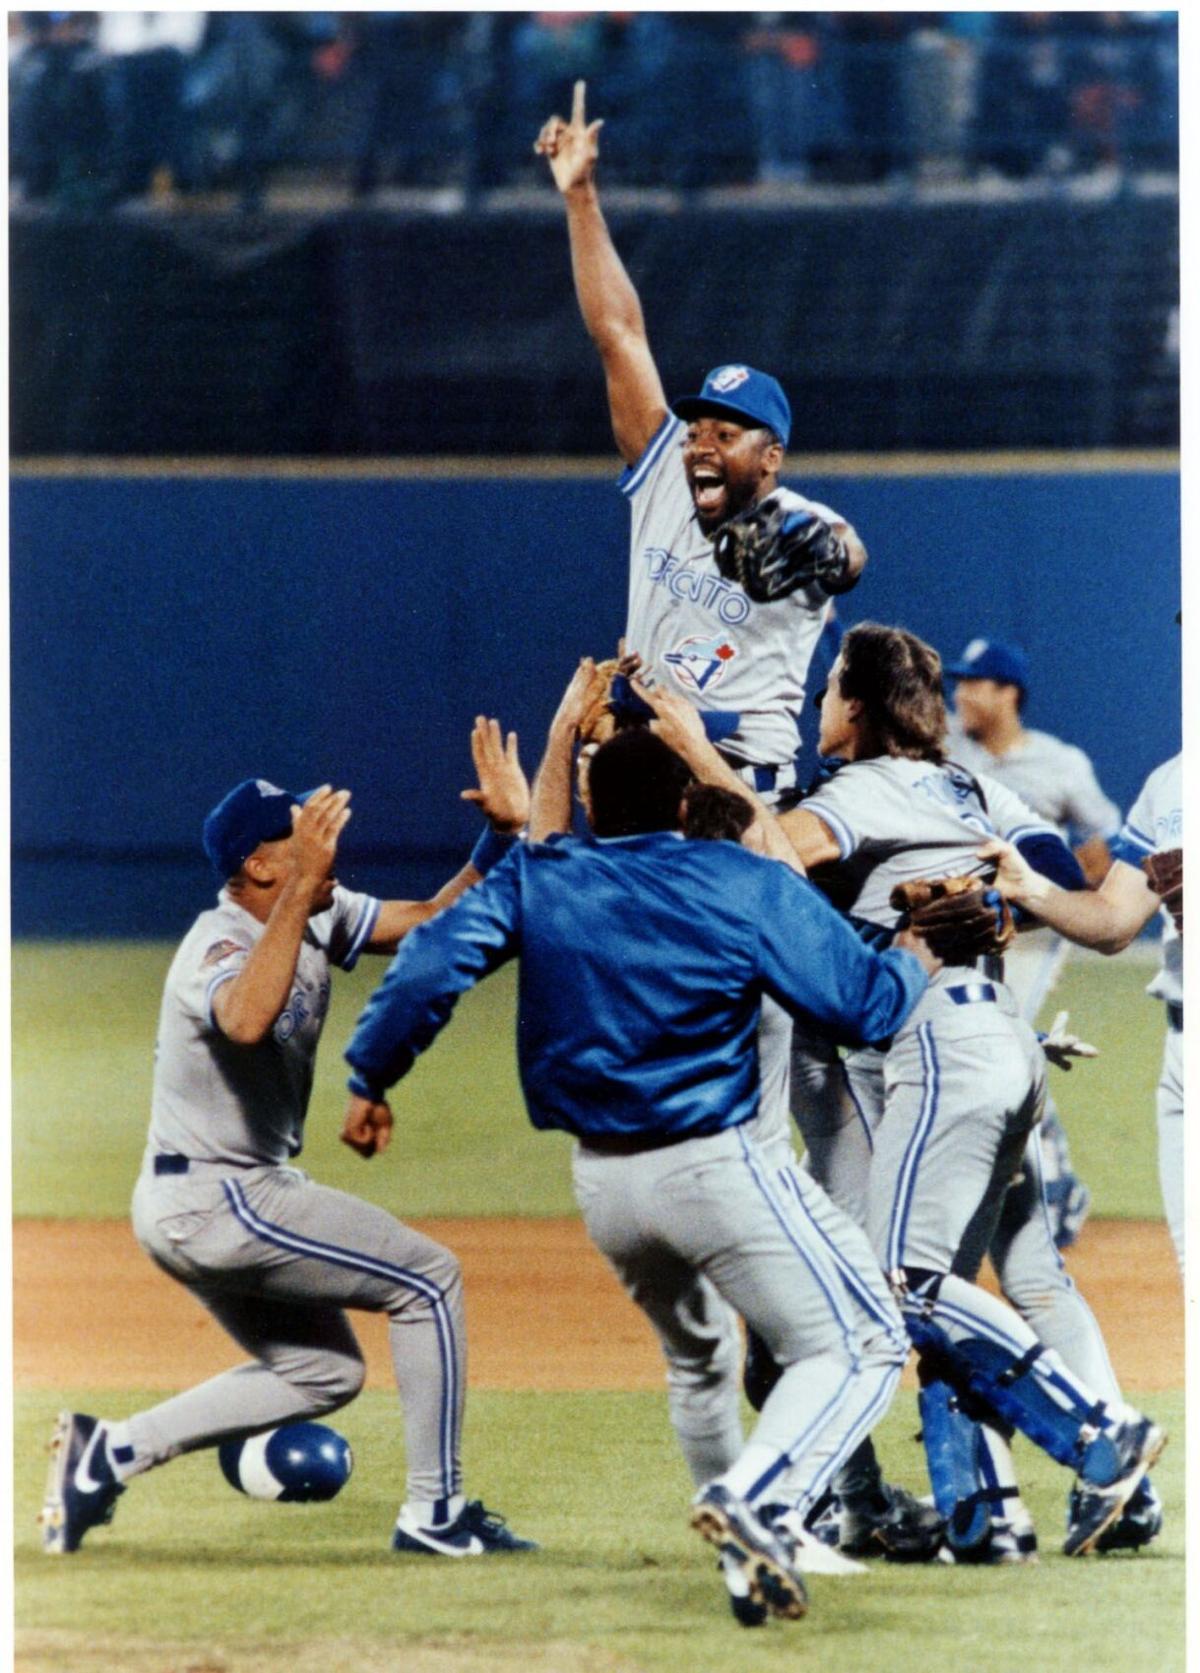 1992 World Series Game 6: The Toronto Blue Jays Are World Series